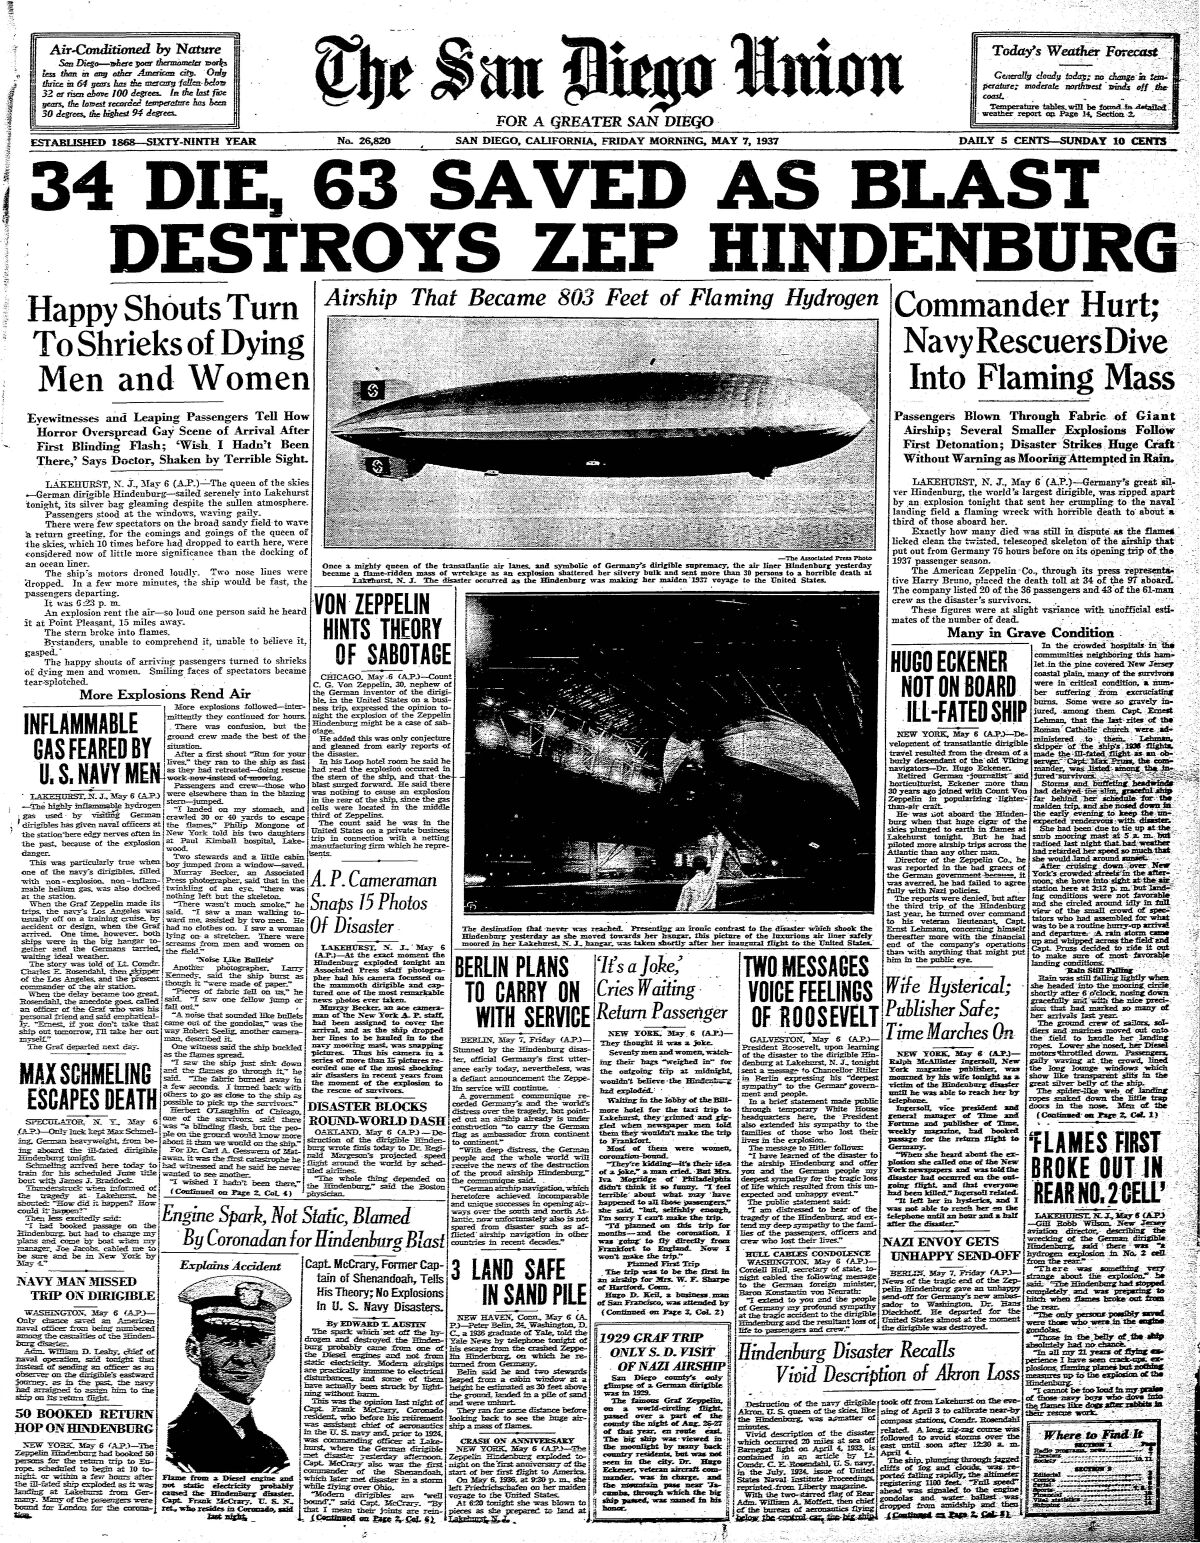 Crash of the Hindenburg reported on the front page of The San Diego Union May 7, 1937.